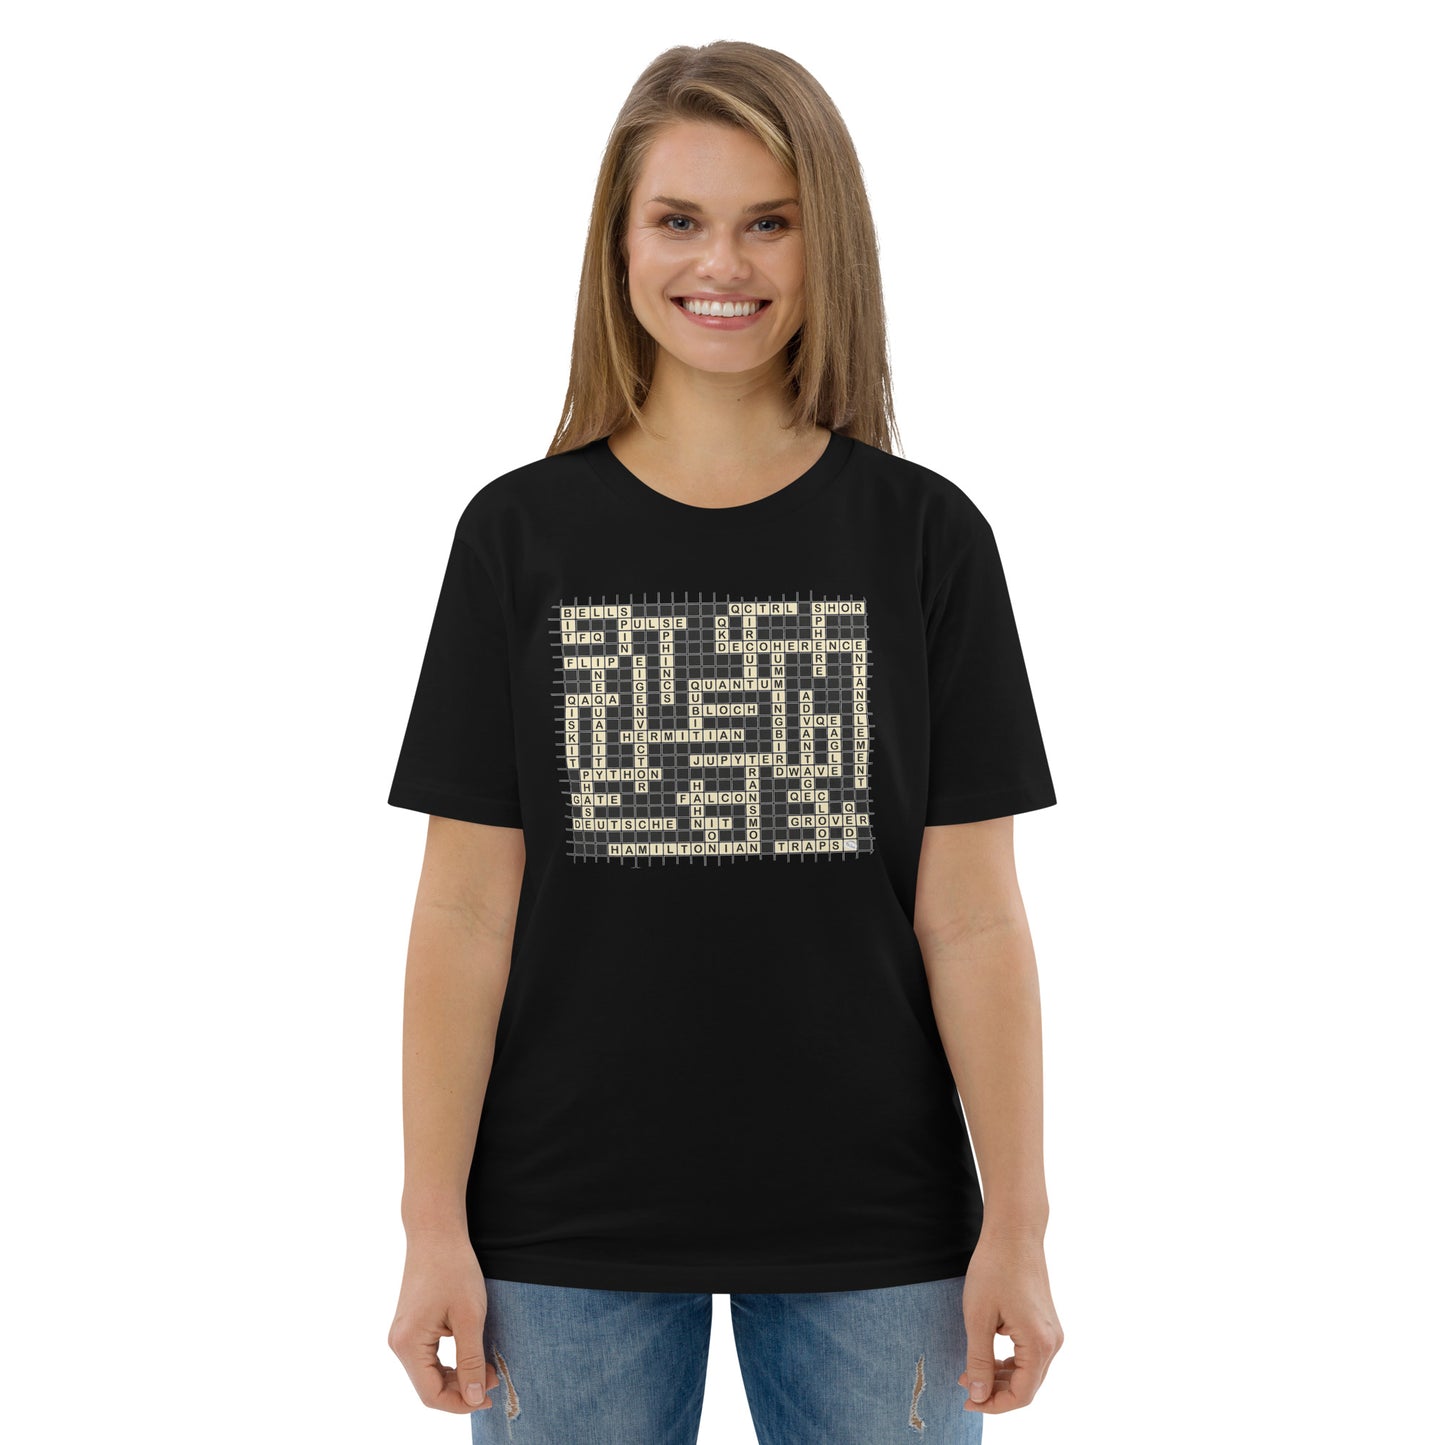 Unisex organic cotton t-shirt - Coded Cross Talking to Quantum Computers